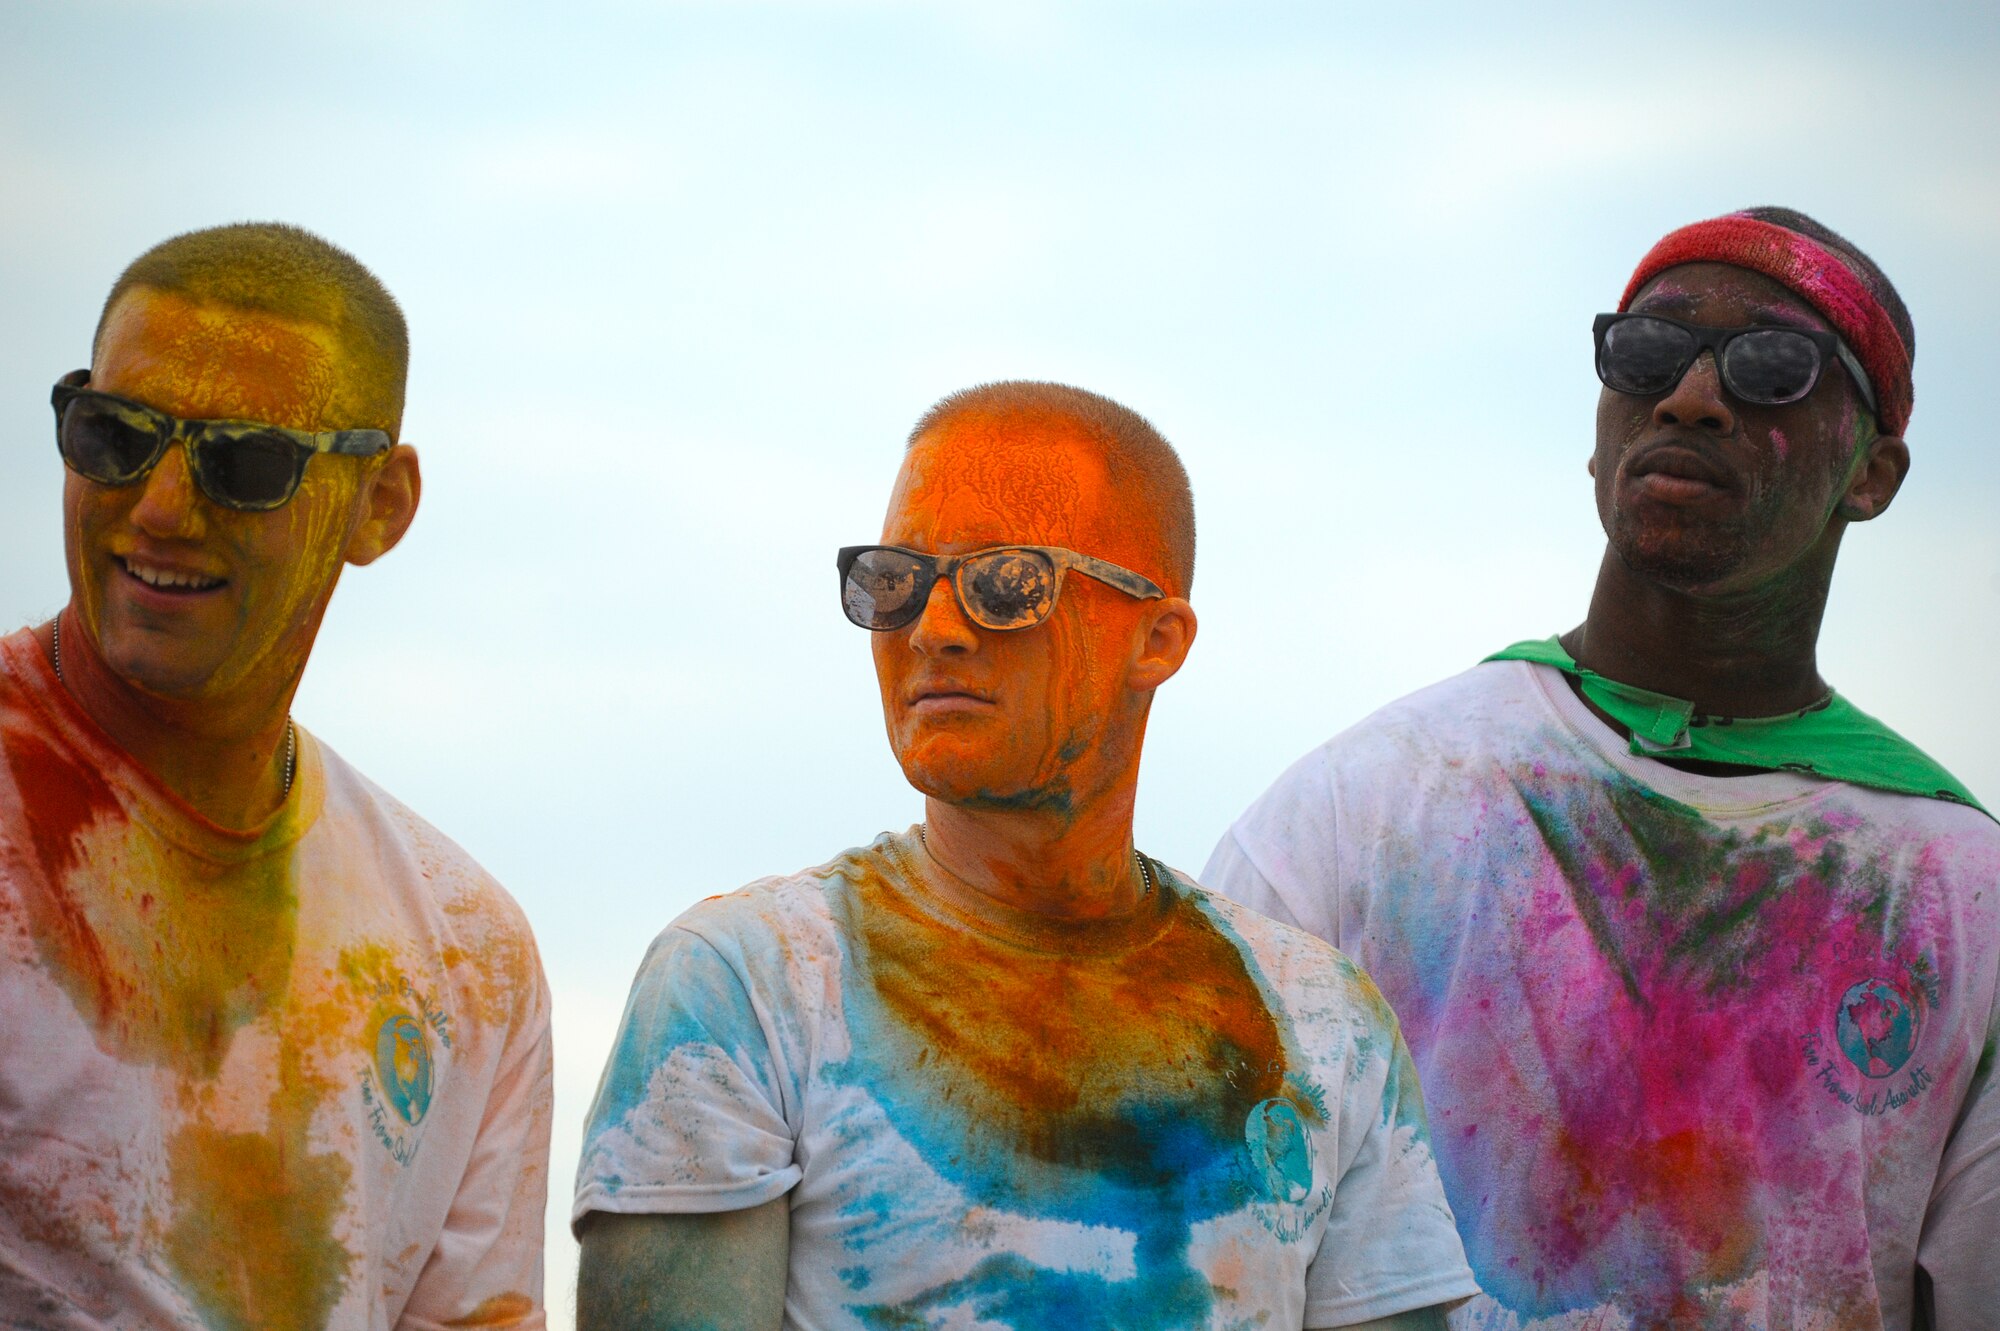 Is The Colorful Powder Used In The Color Run Actually Safe?, by Drug  Justice